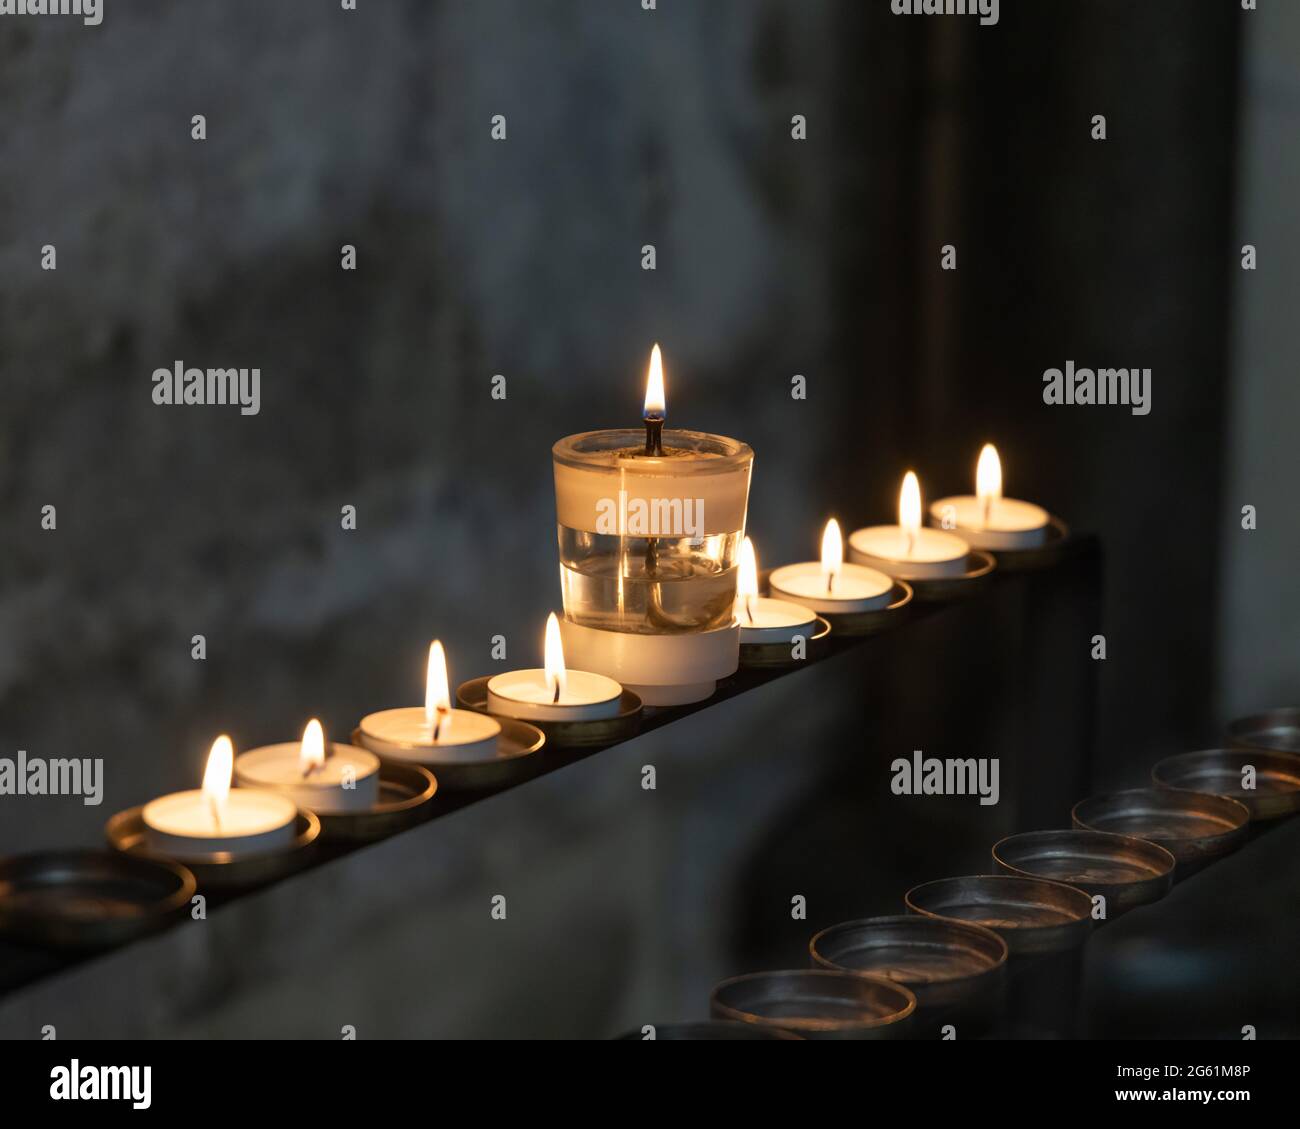 June 21st 2021: Votive candles. In a dark English church a large candle with oil and a wick stands in the middle of a line of eight lit tea candles. Stock Photo